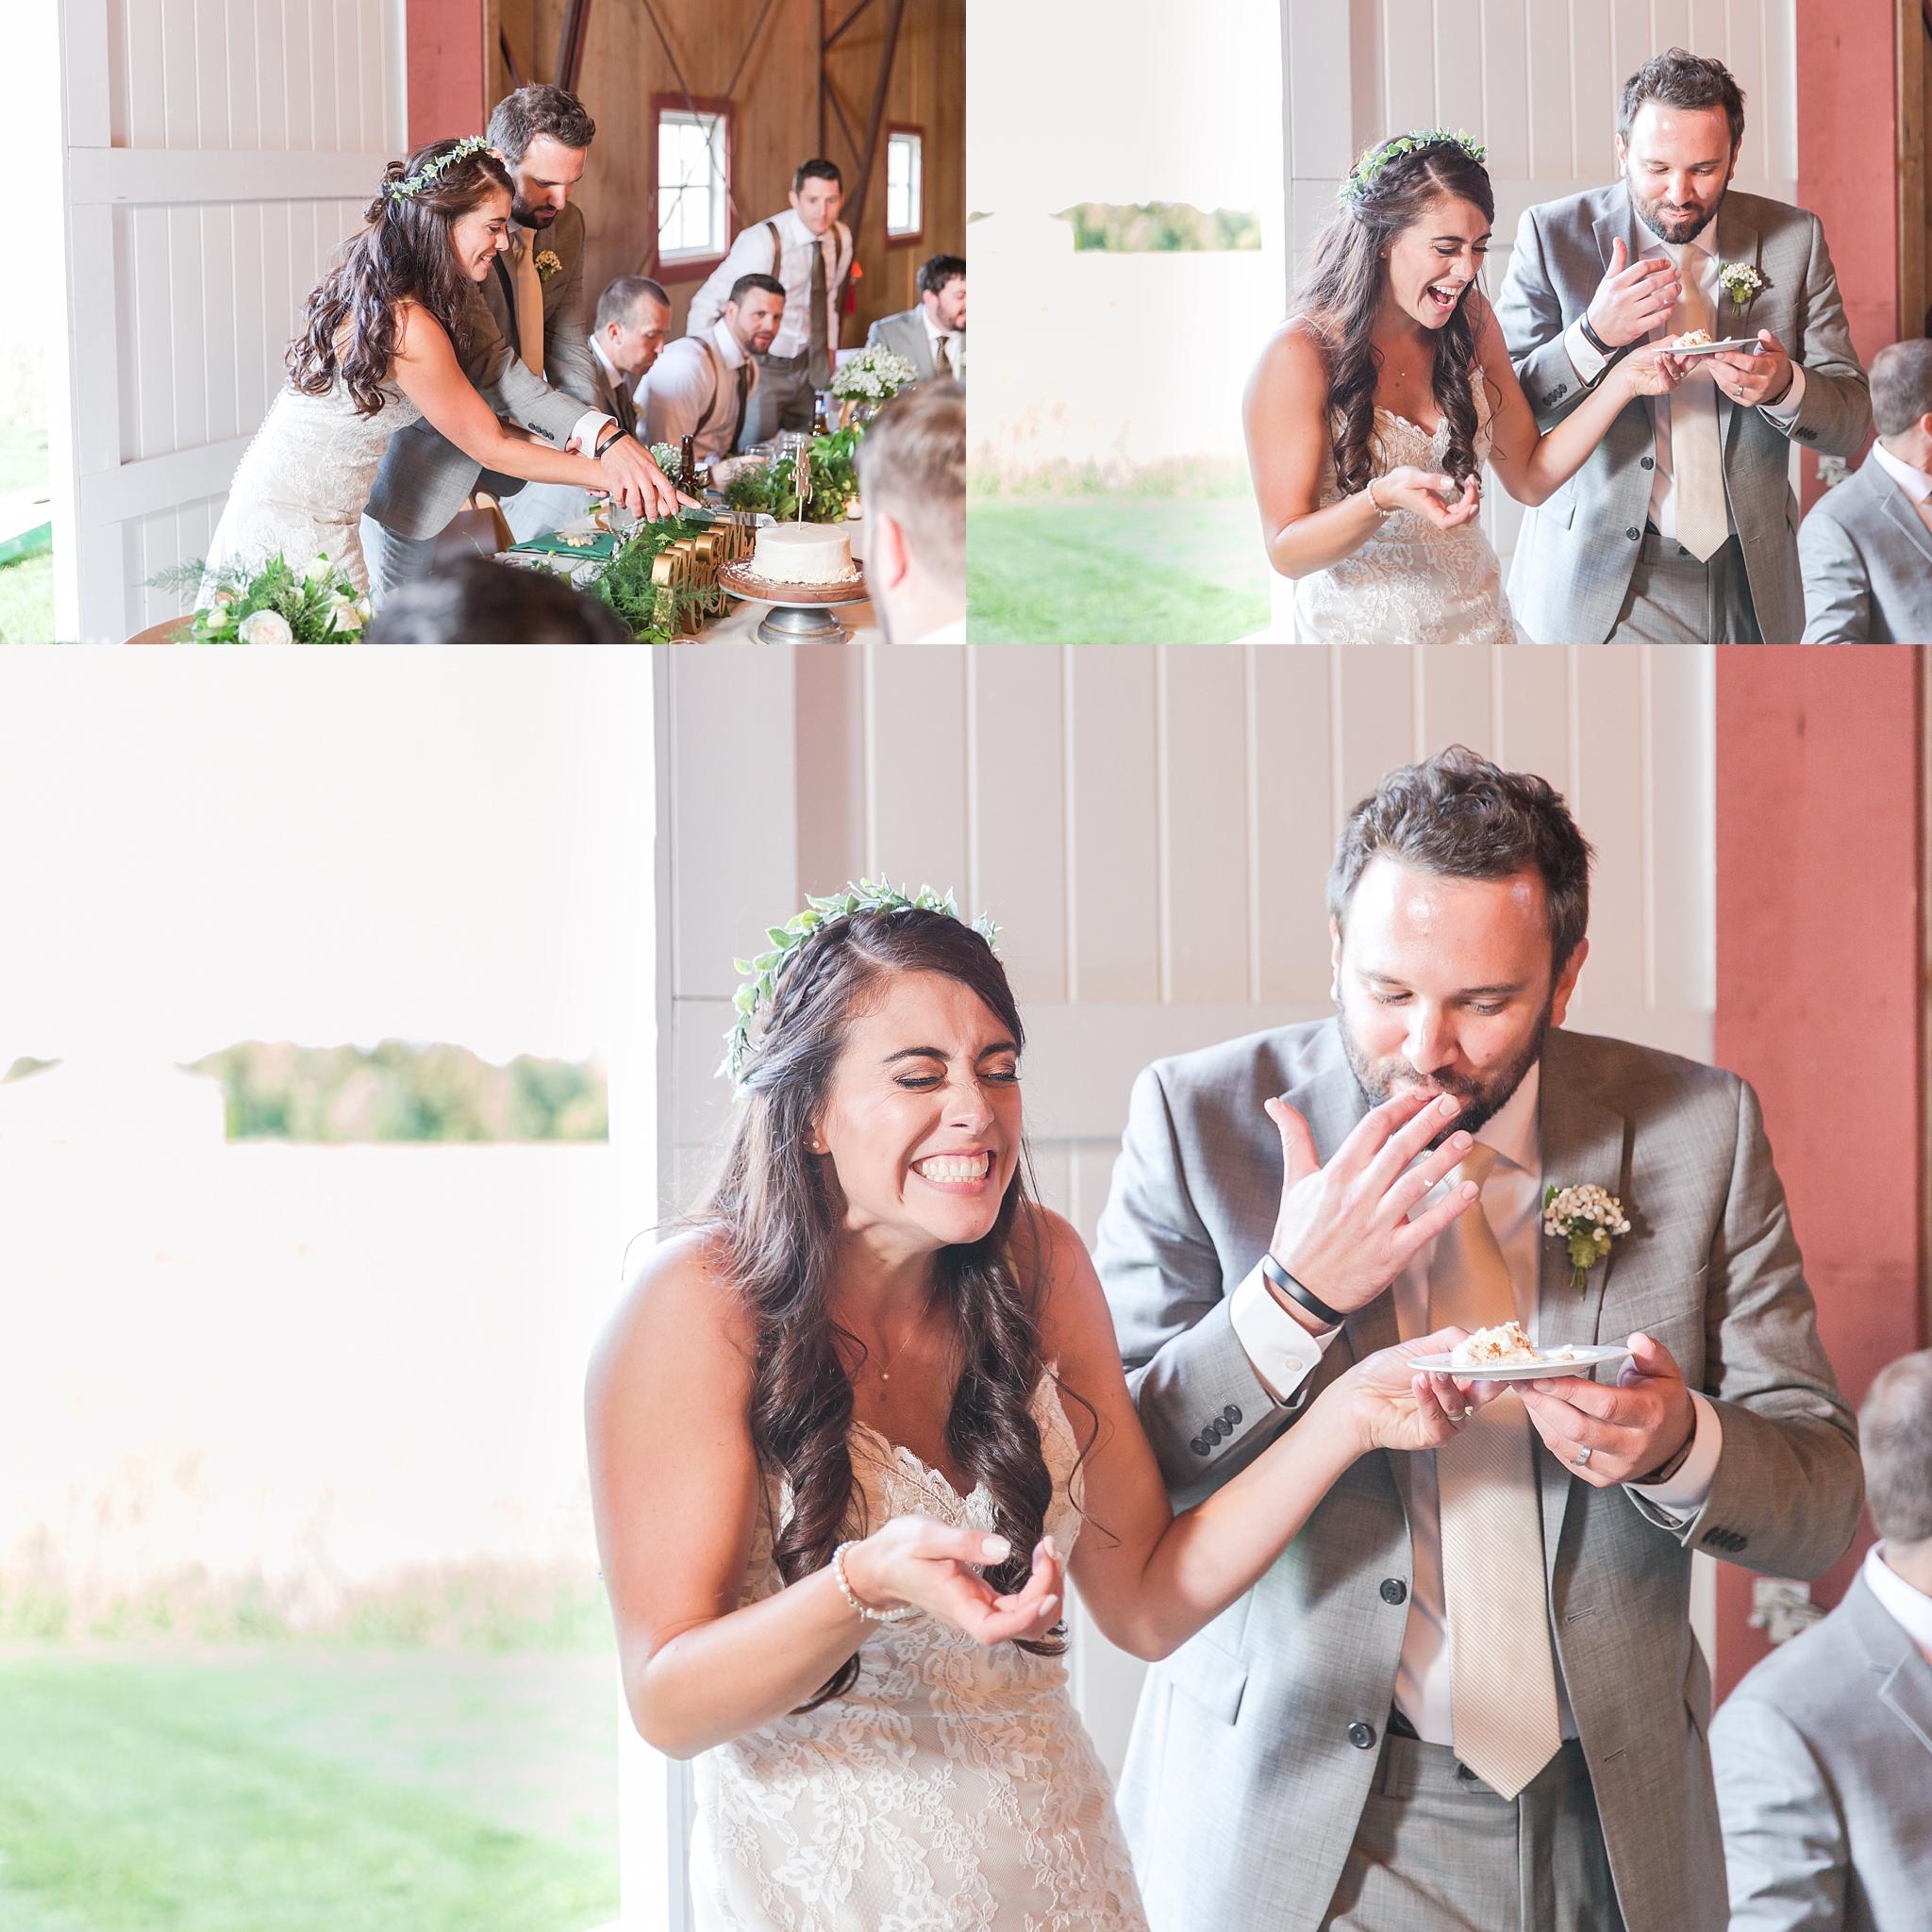 natural-rustic-wedding-photos-at-frutig-farms-the-valley-in-ann-arbor-michigan-by-courtney-carolyn-photography_0079.jpg